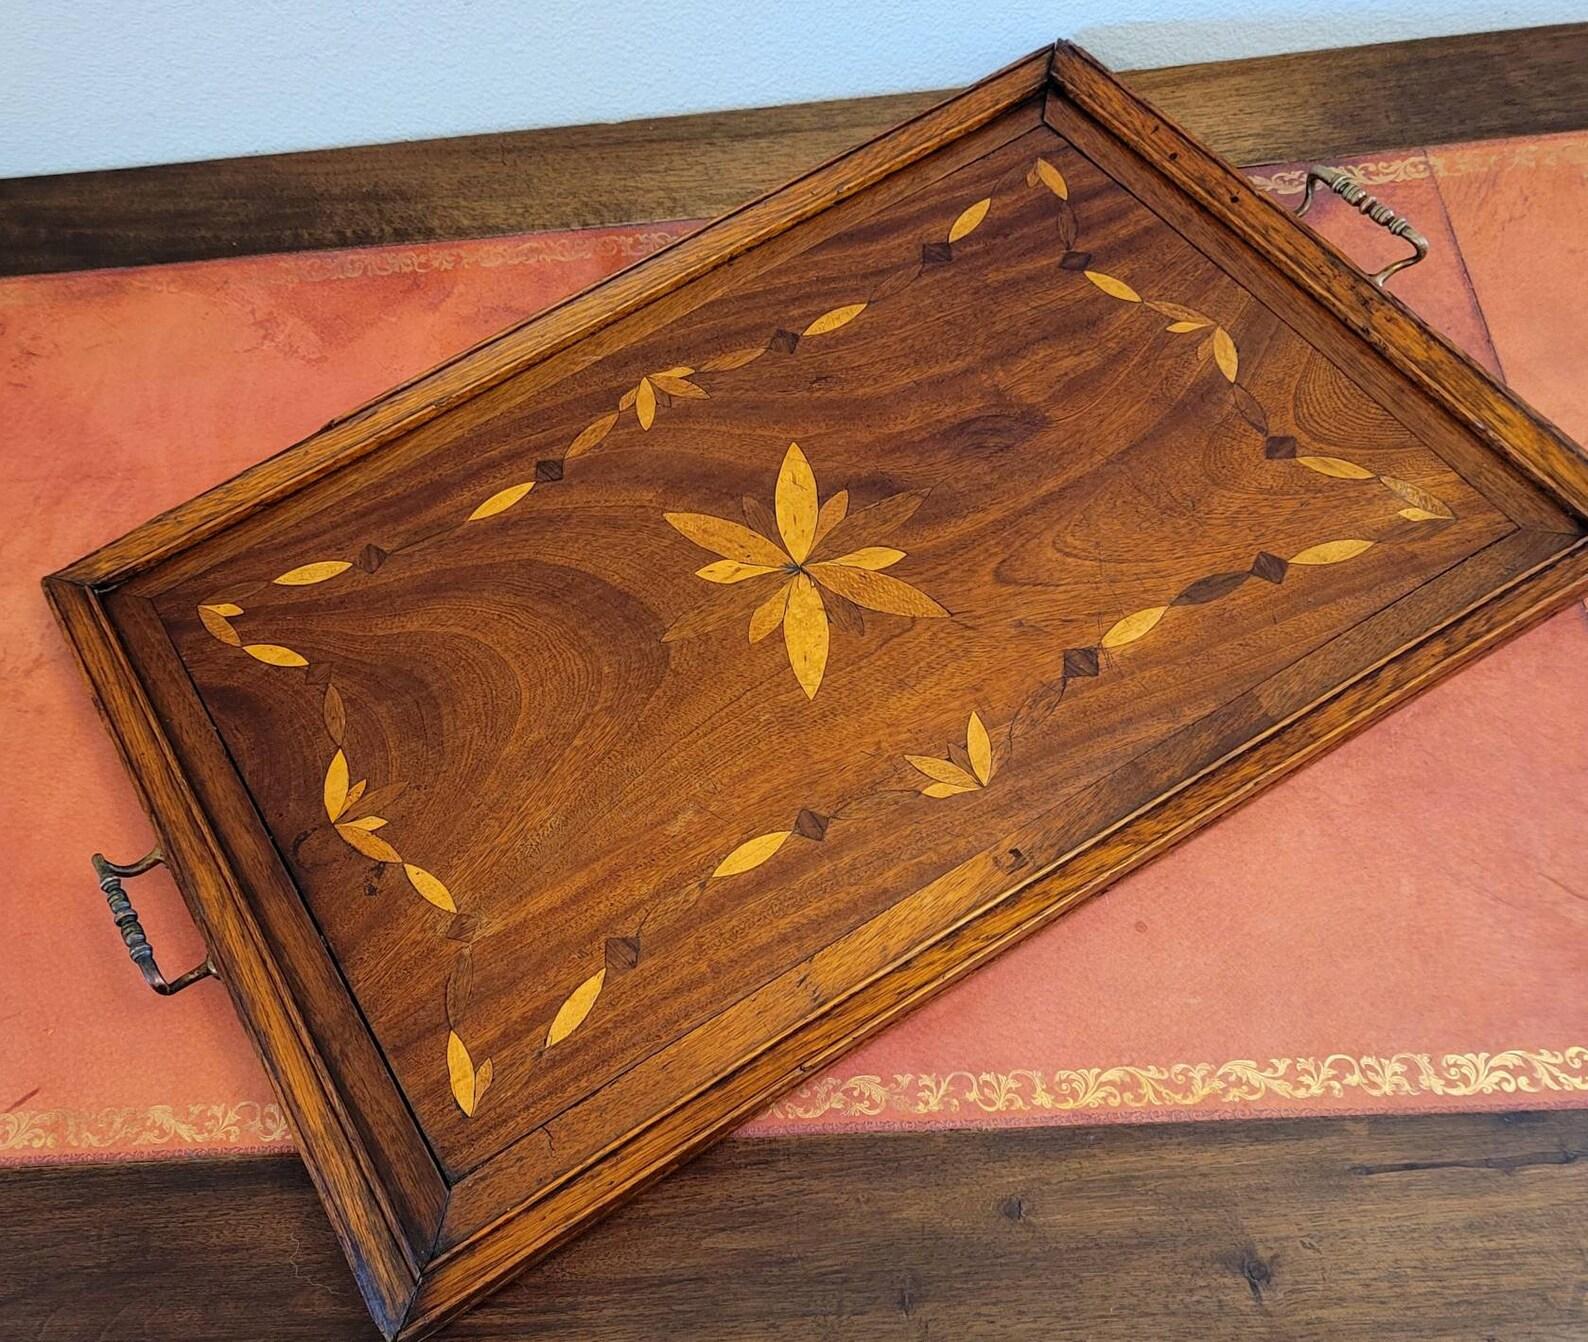 A large late 19th century English mahogany inlaid decorative serving tray with beautiful warm patina. Circa 1890

Born in England, hand-crafted of rich solid mahogany, outstanding coloring, warmth, superb highly figured grain detailing, and soft